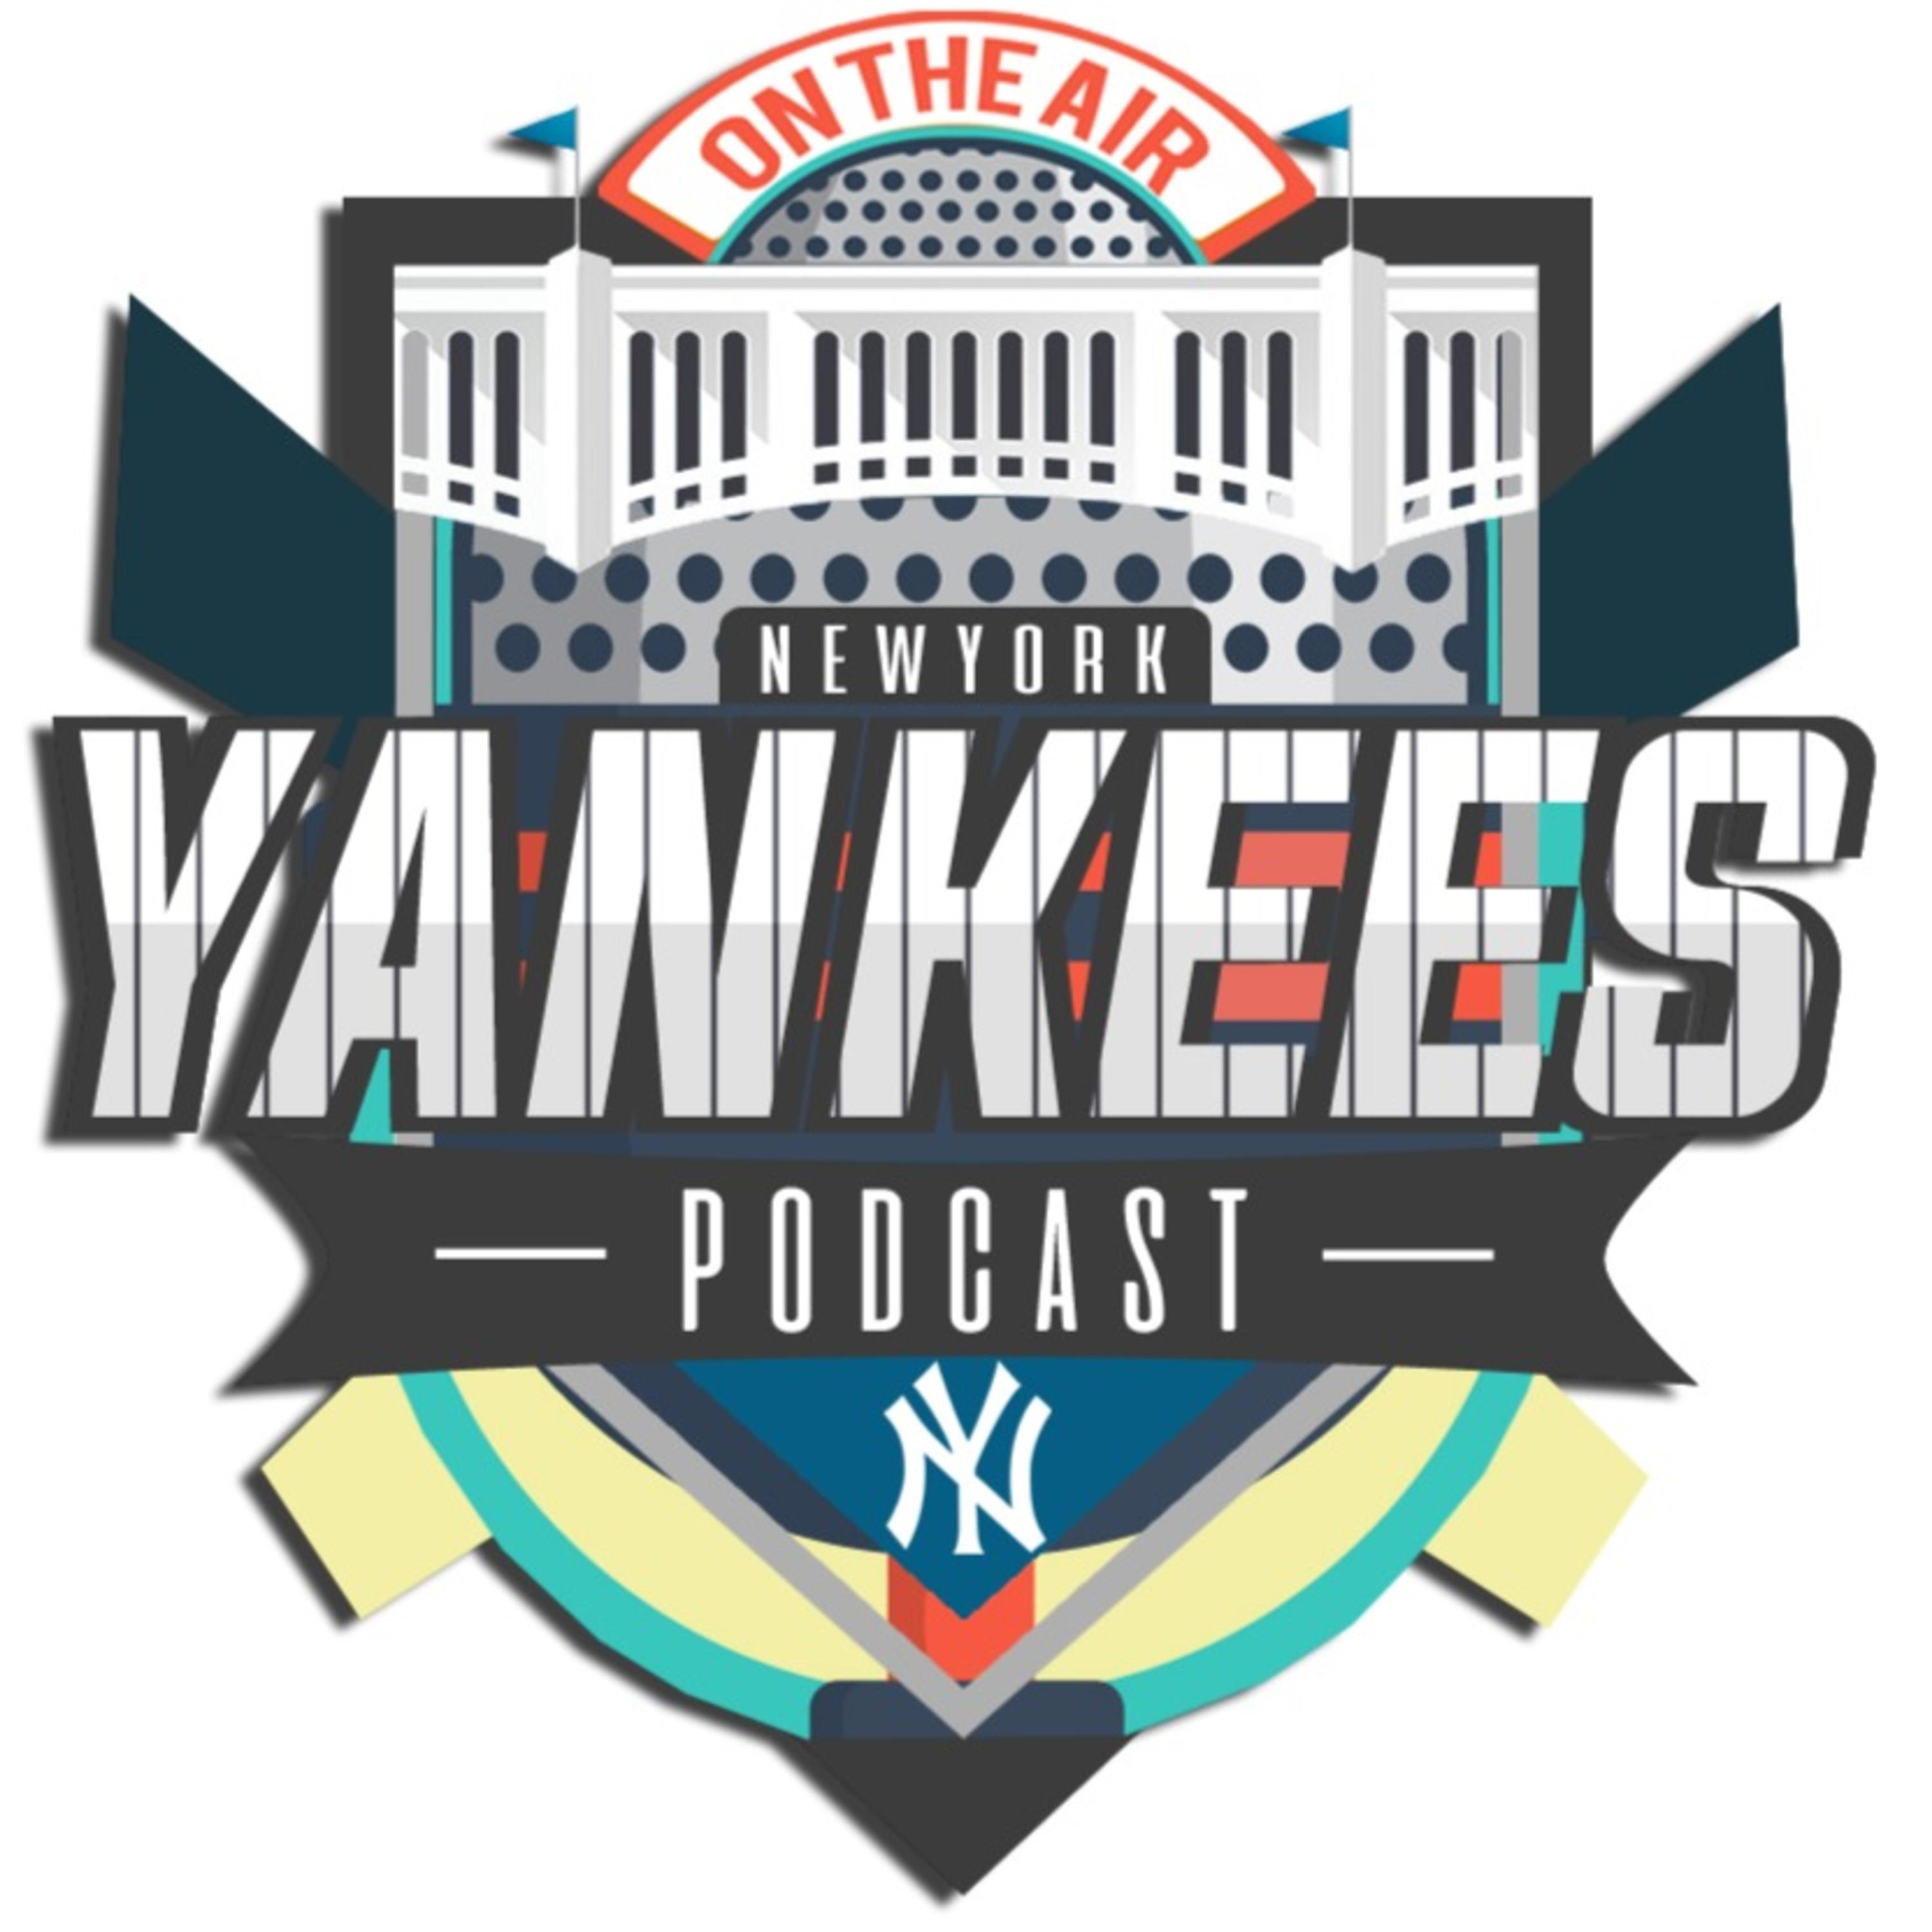 New York Yankees Hungary Podcast - Bé x DS! x Mike - S02EP12